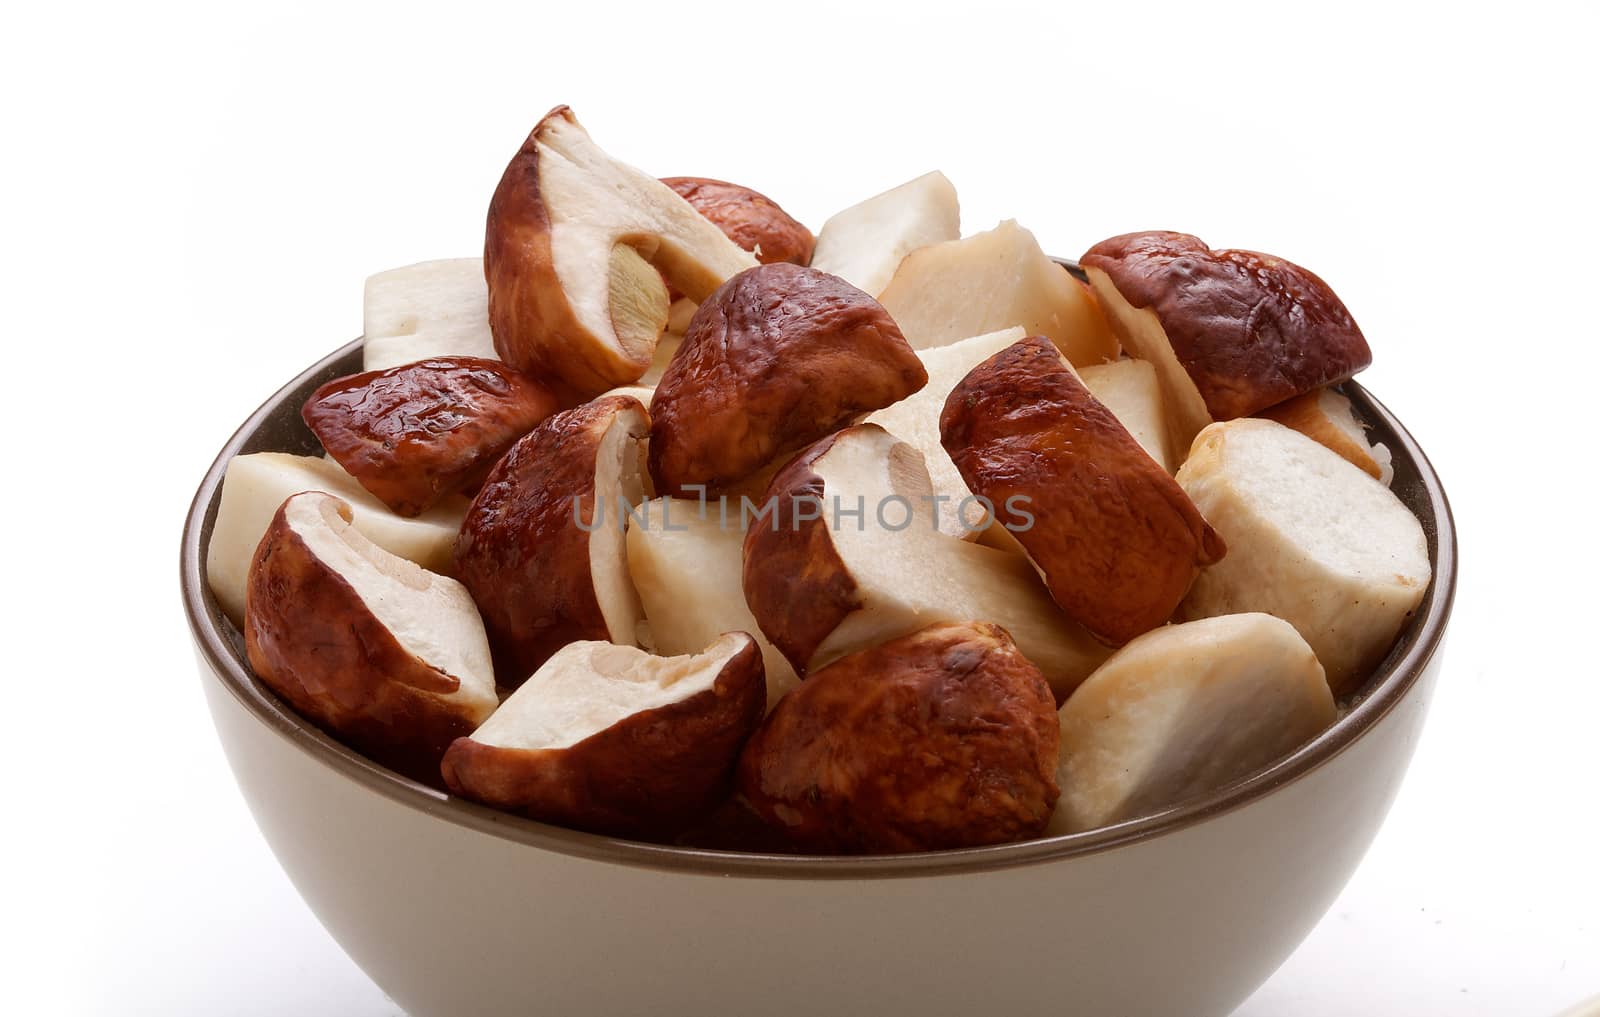 Sliсed pieces of white mushrooms in the white bowl